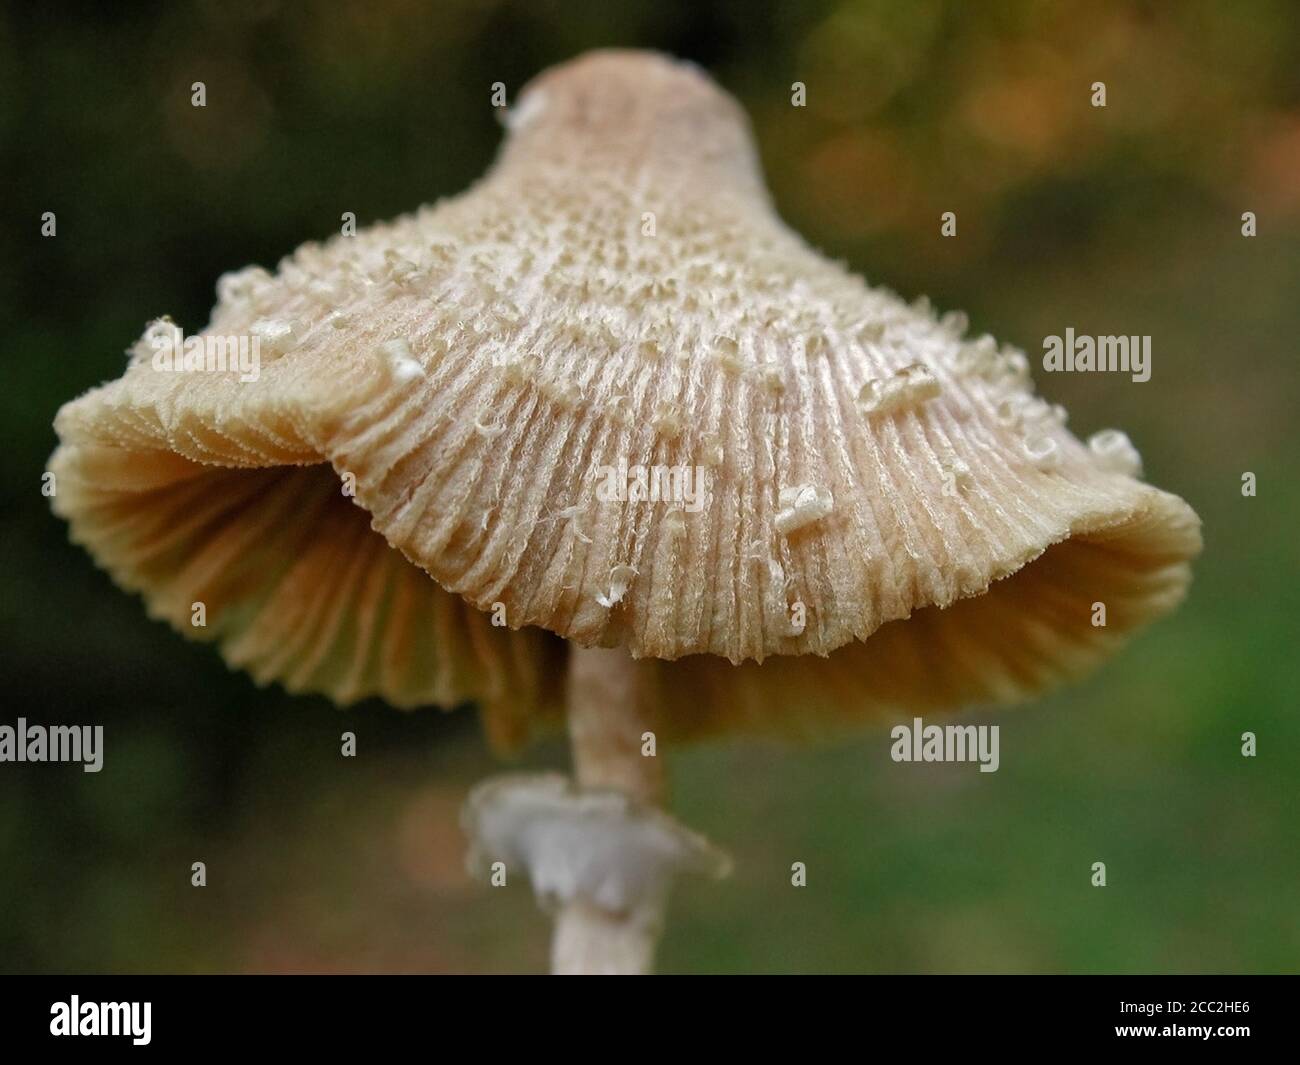 Mushrooms are a form of fungi found in natural settings around the world.; This one is found in a forested area of North Central Florida. Stock Photo